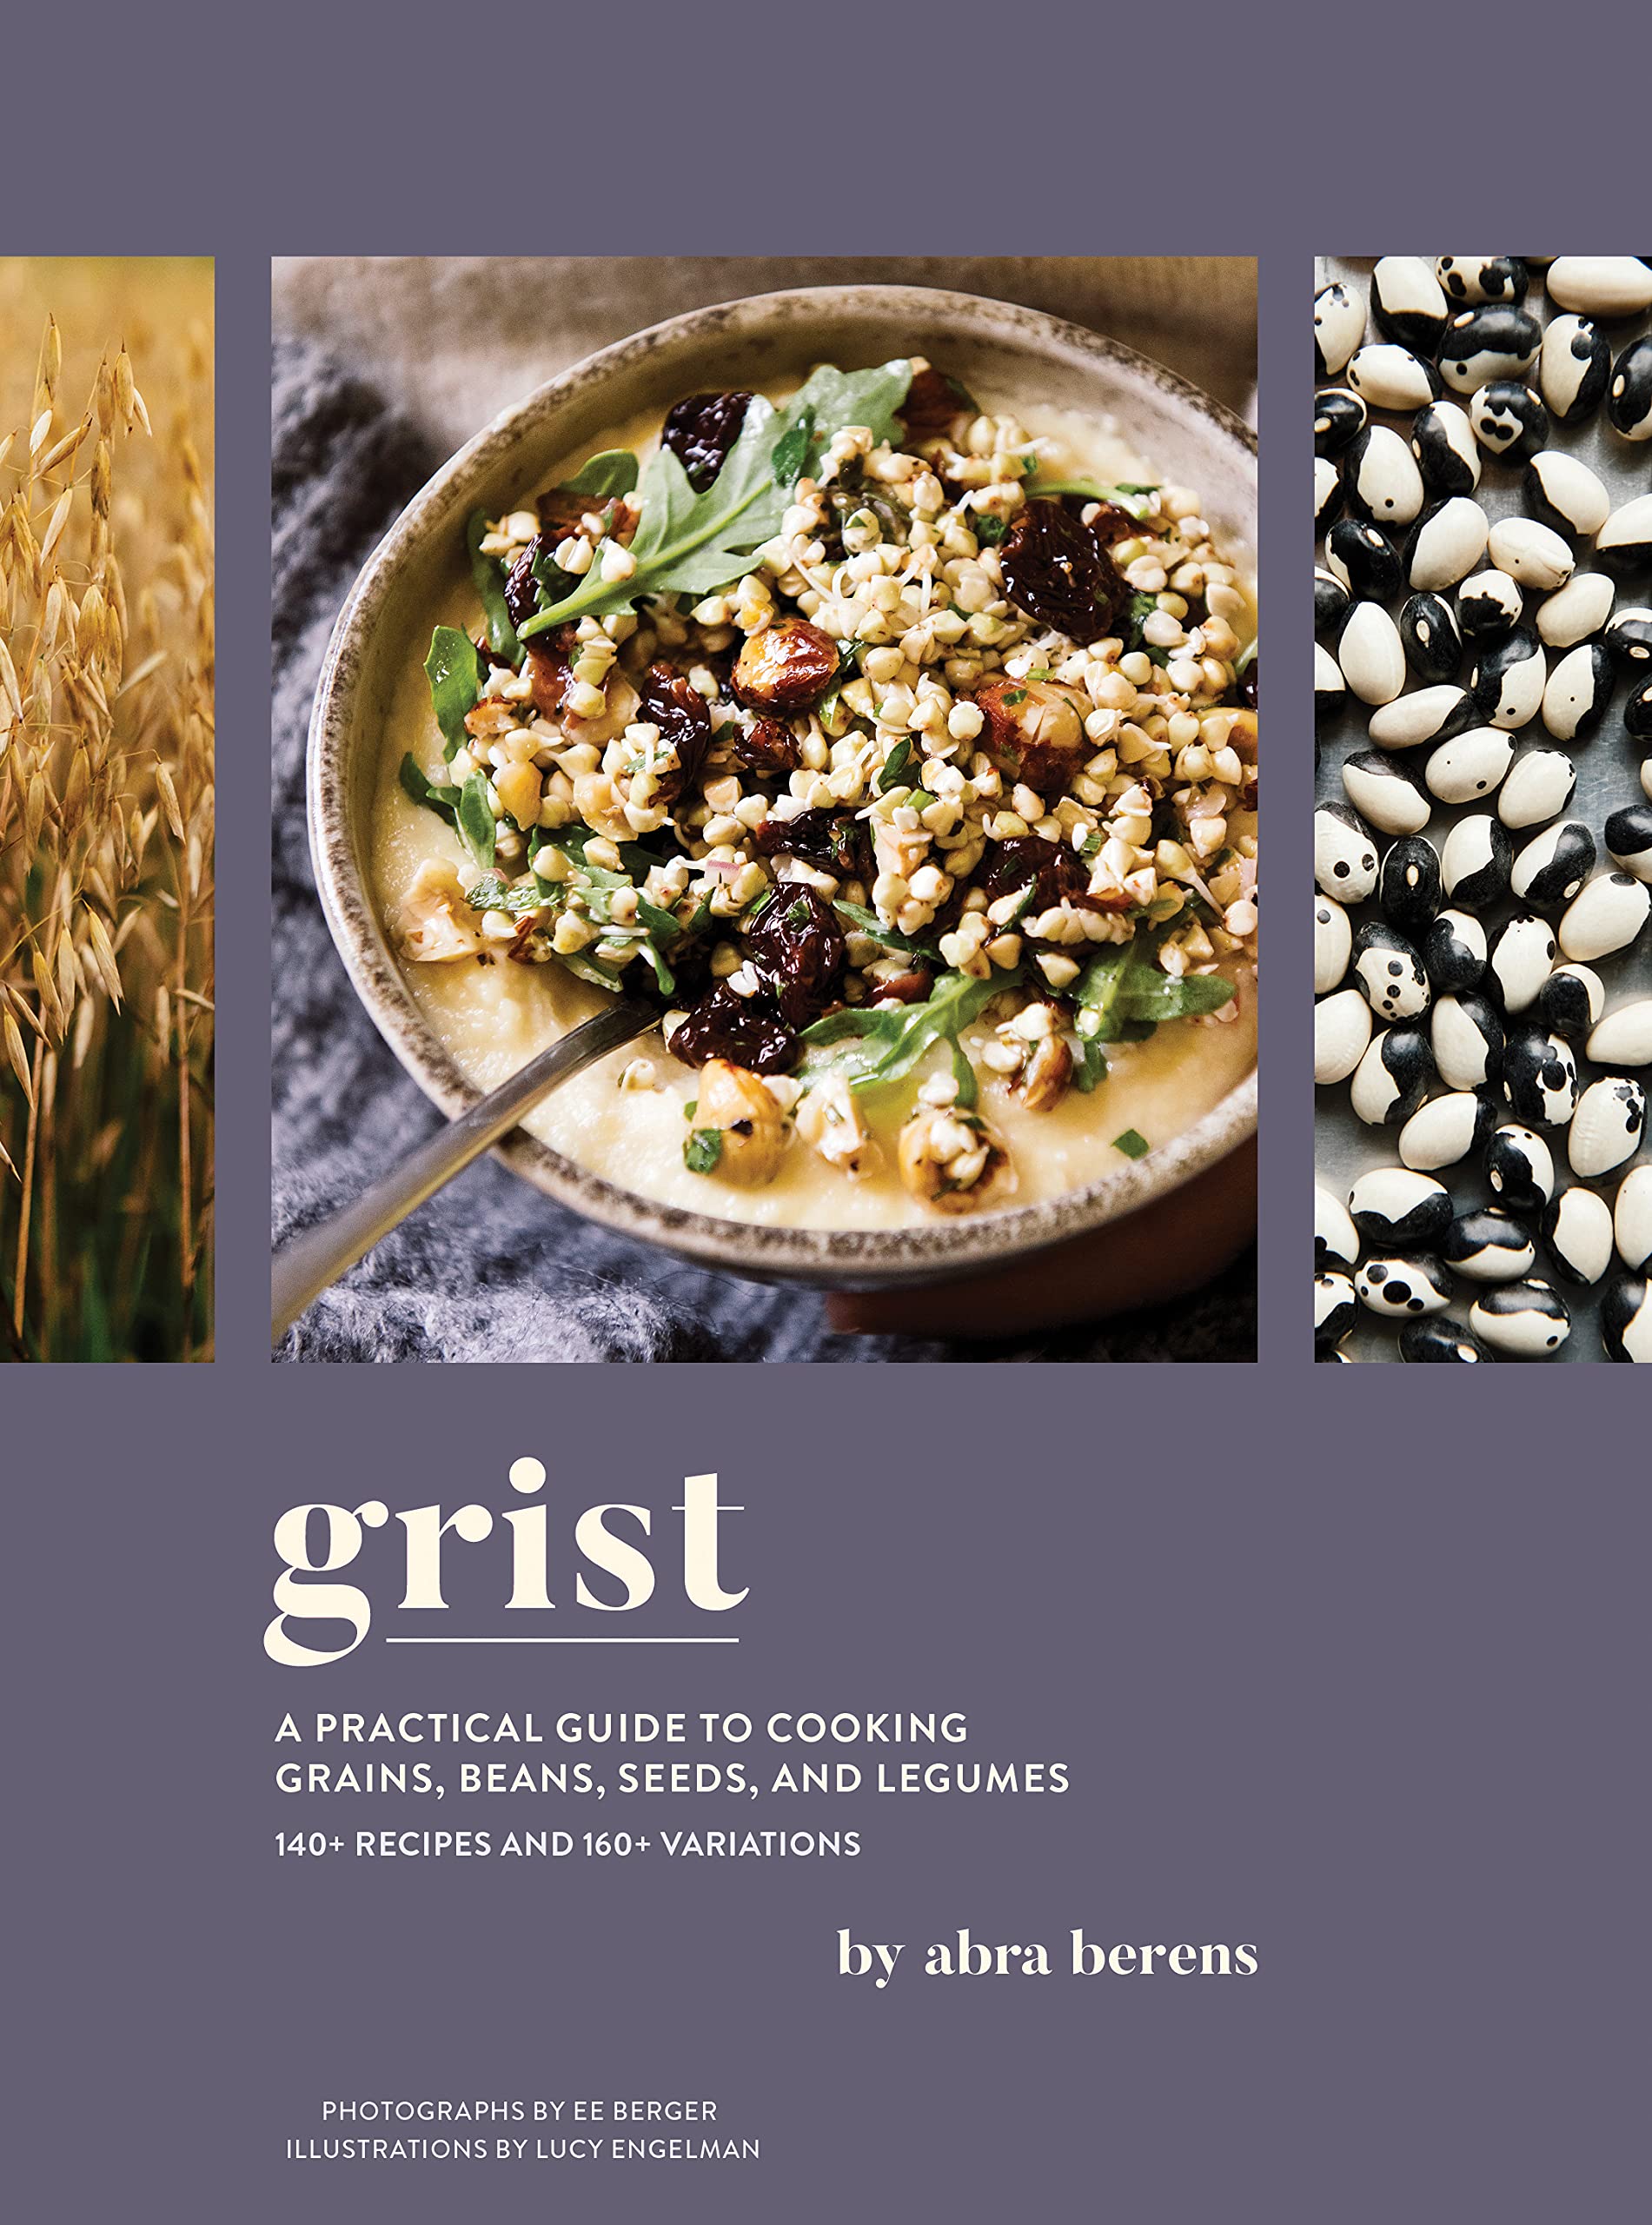 Grist: A Practical Guide to Cooking Grains, Beans, Seeds, and Legumes (Abra Berens) *Signed*